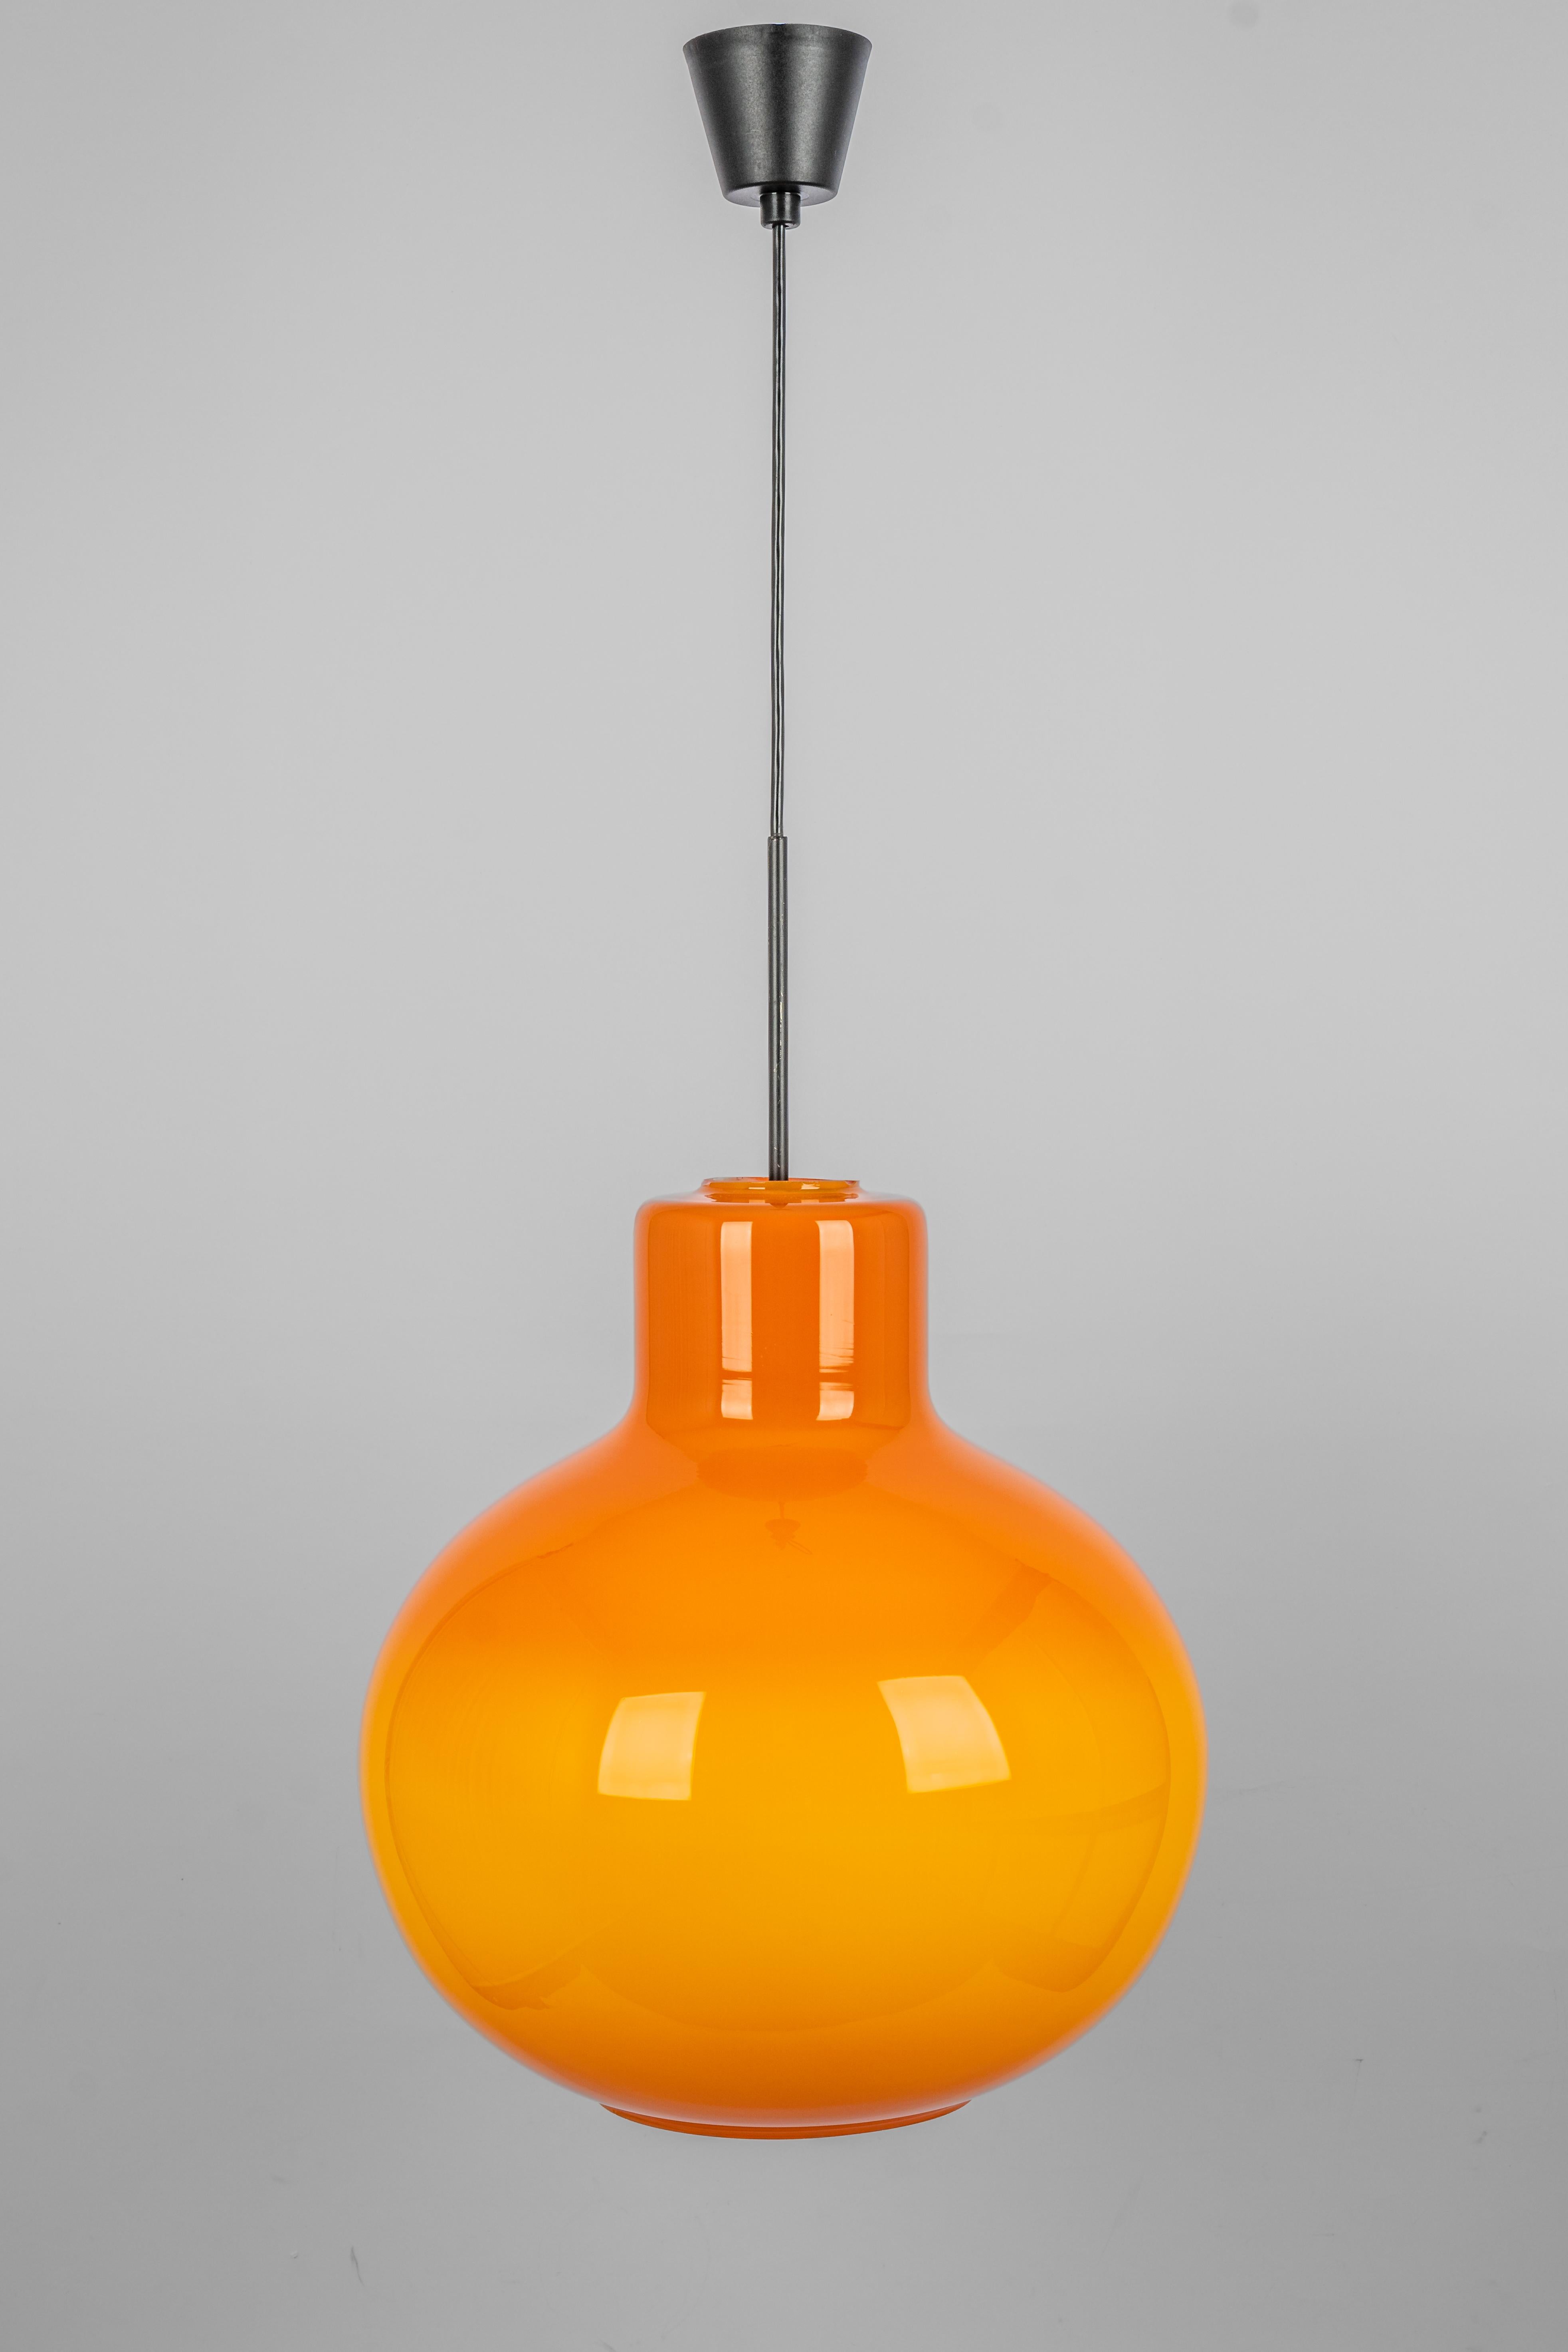 1 of 3 Large Opal Orange Ball Pendant Light by Doria, Germany, 1970s For Sale 1